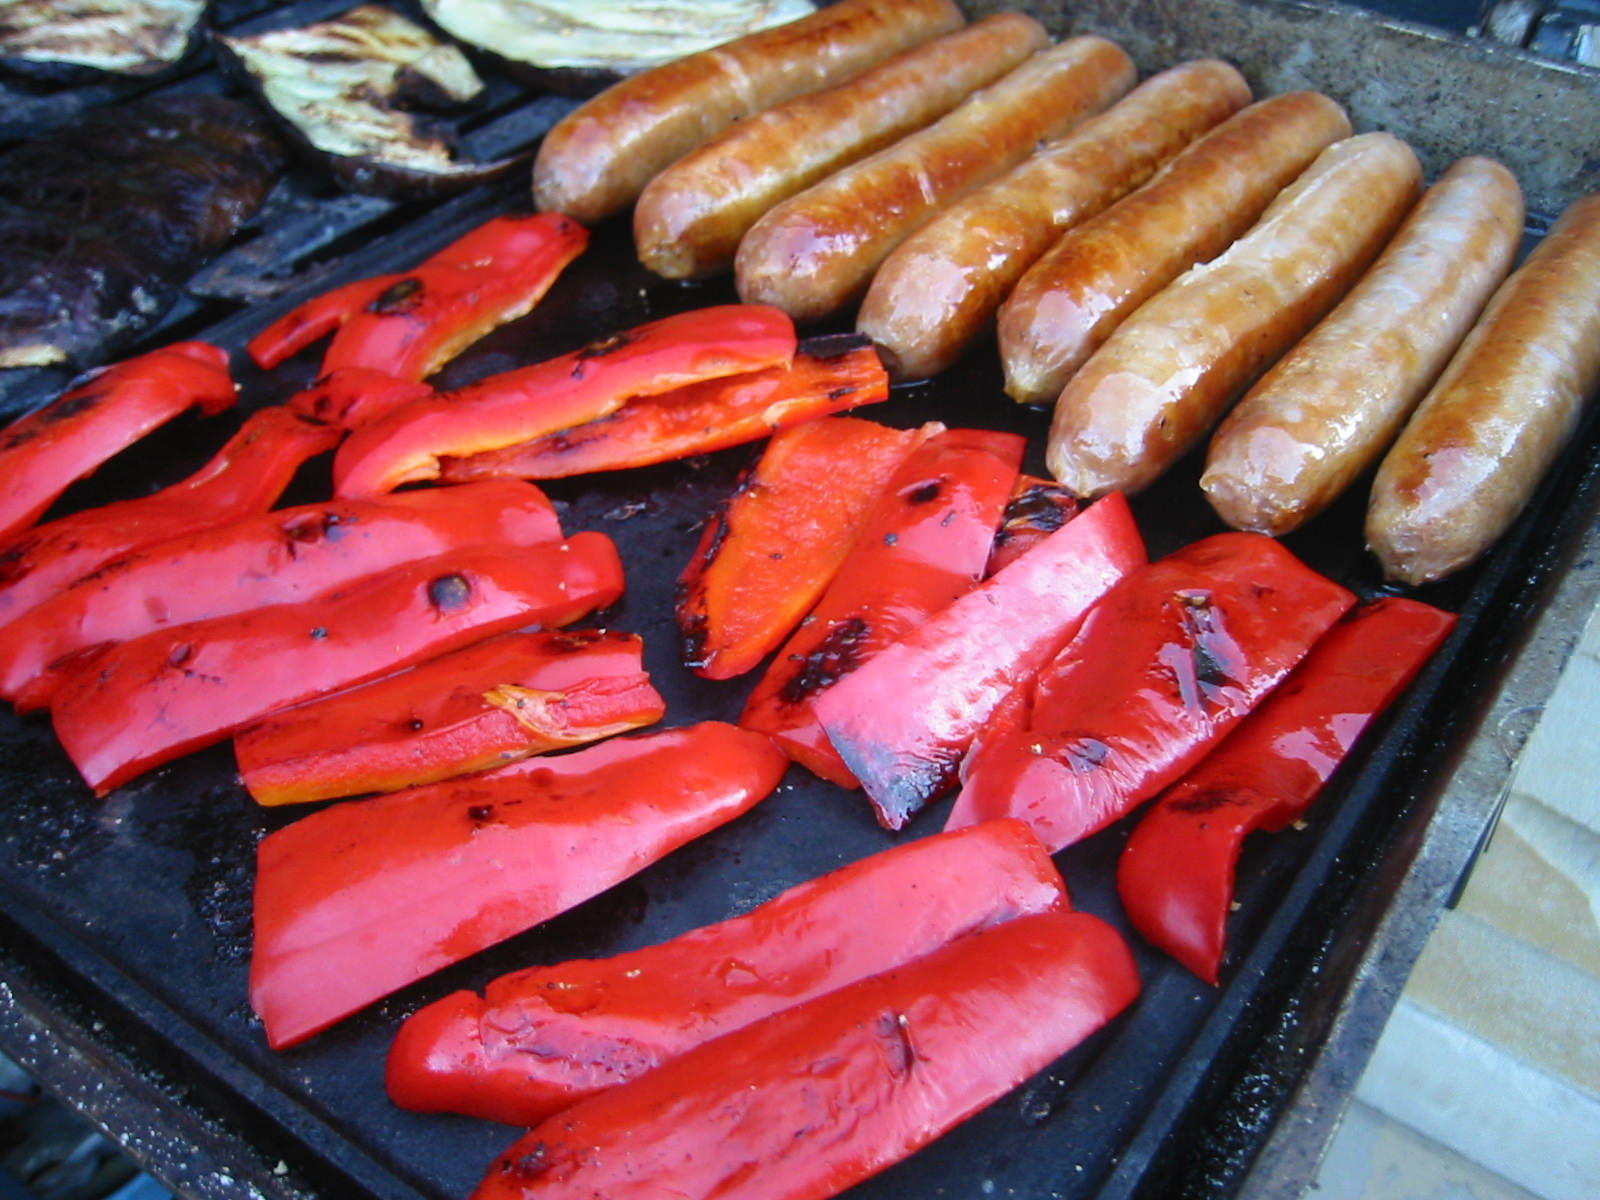 Red capsicum and beef sausages